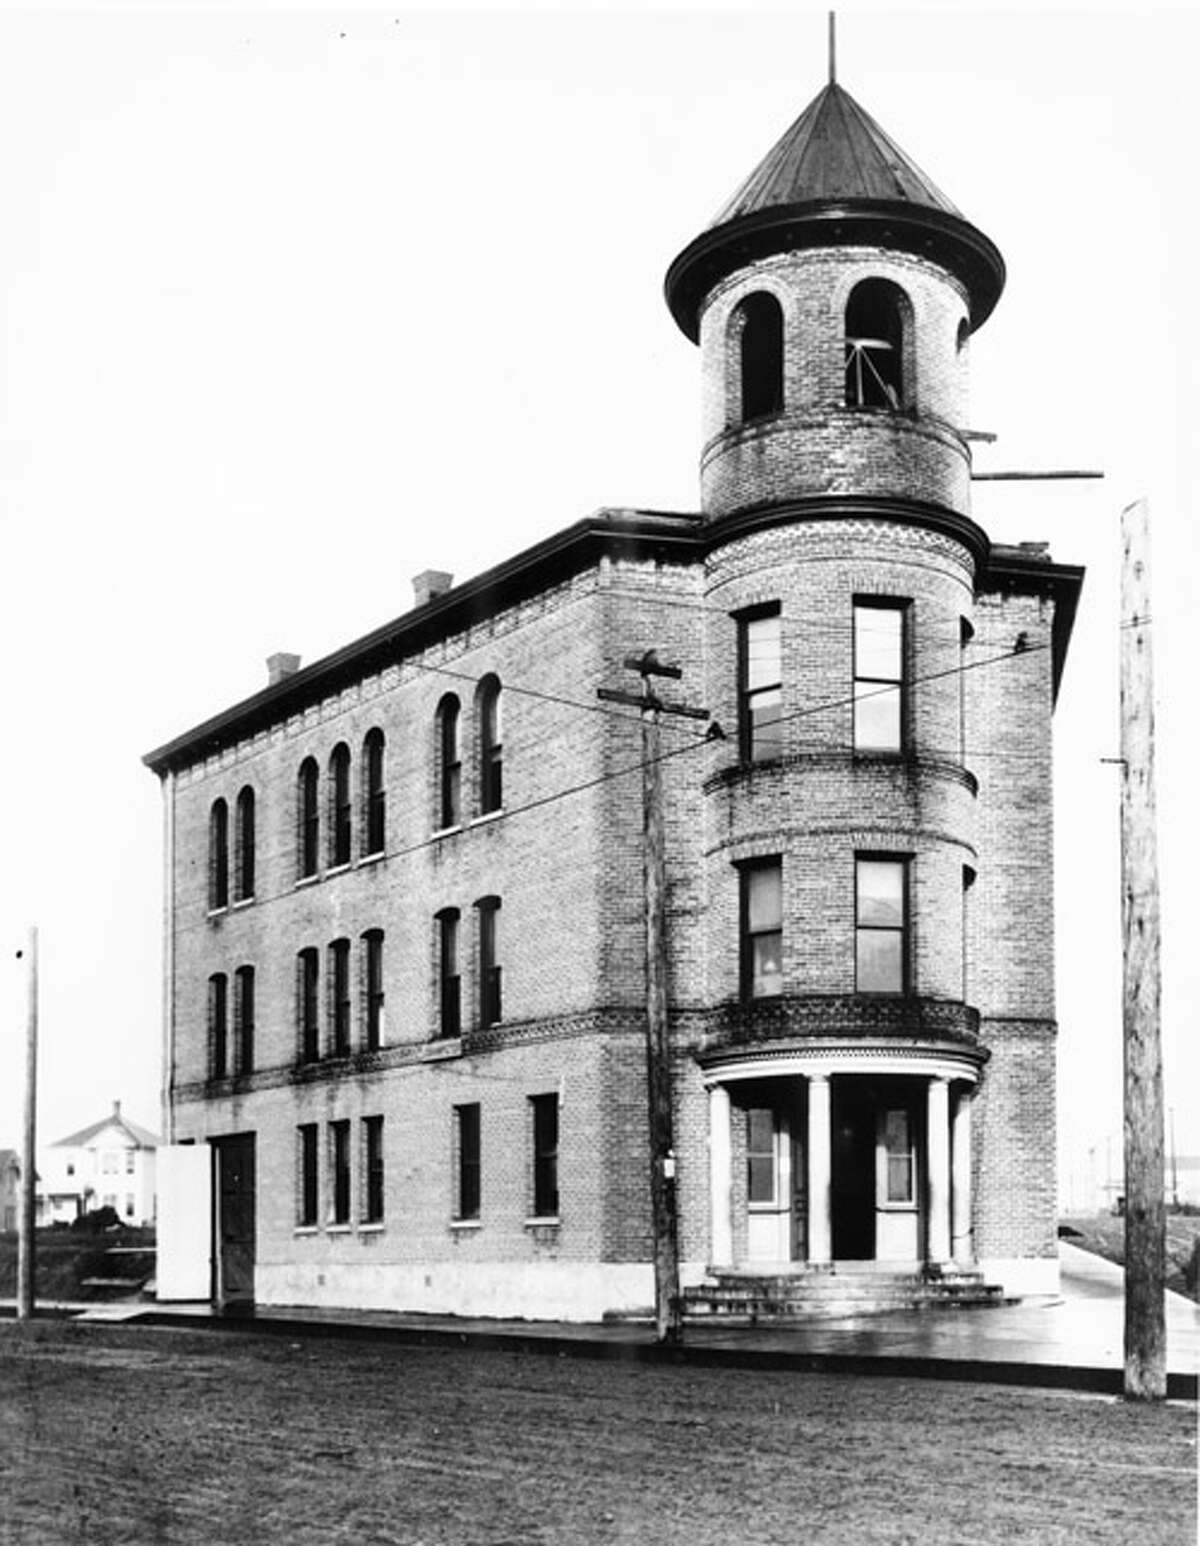 Ballard's old City Hall included the fire department, city offices, community meeting rooms, a ballroom and the jail, according to Seattle Municipal Archives caption information. This photo from 1902 shows the building five years before Ballard cast off its independence in favor of joining Seattle. The building was torn down in 1965. Photo courtesy Seattle Municipal Archives, University of Washington Special Collections, A. Curtis 00881.